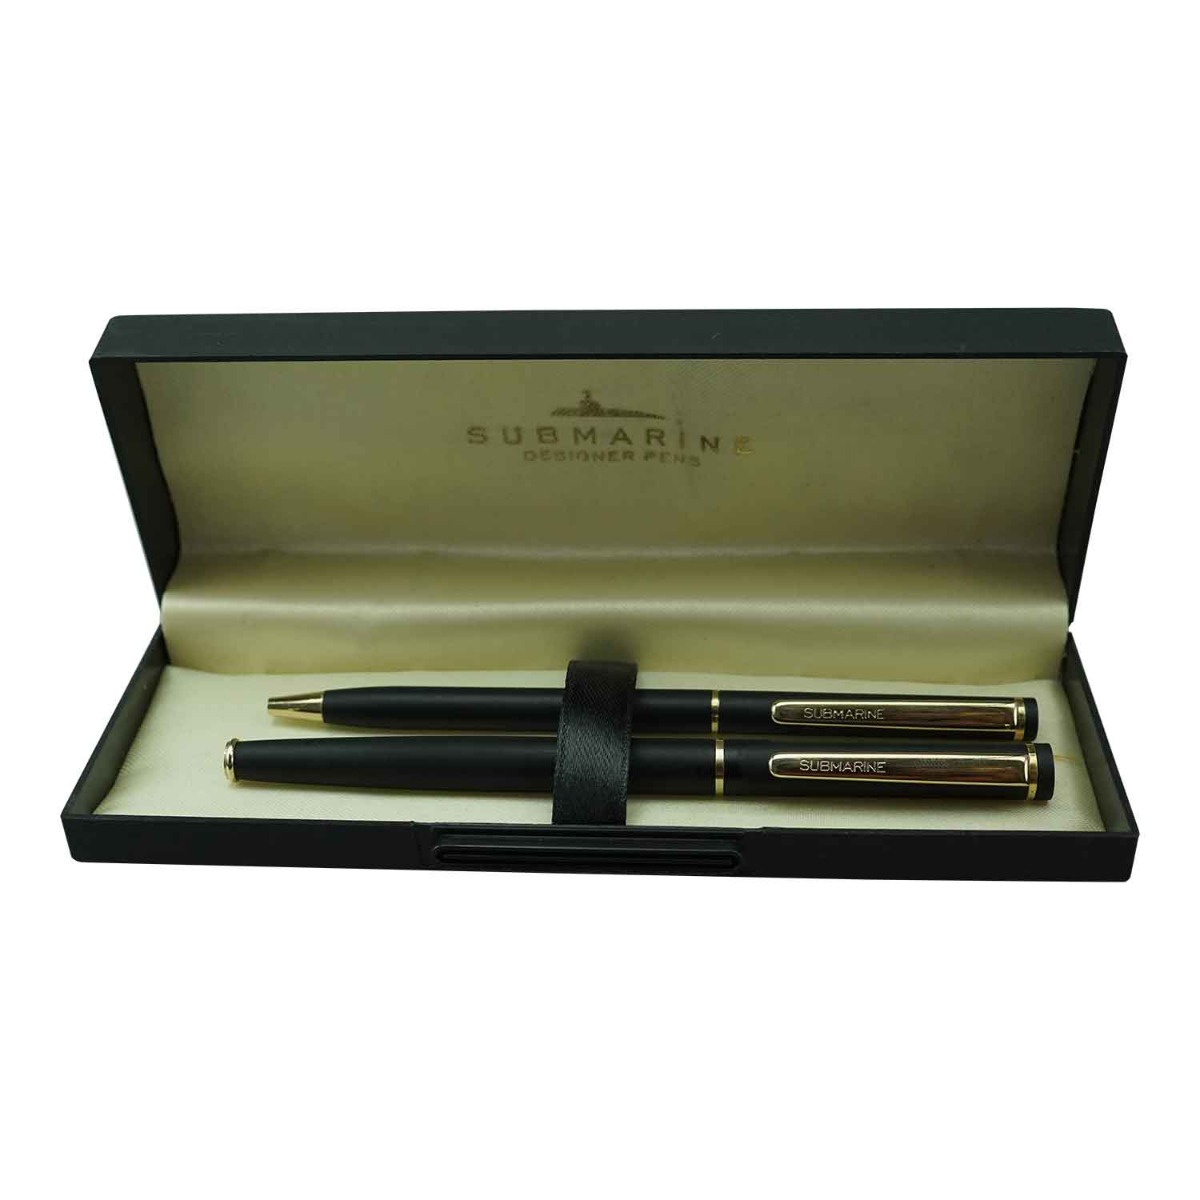 Submarine  2051 Model:15989   Slim Mat Finish  Black Color Body  With Gold Color Clip Fine Tip  Roller And Ball Pen Set